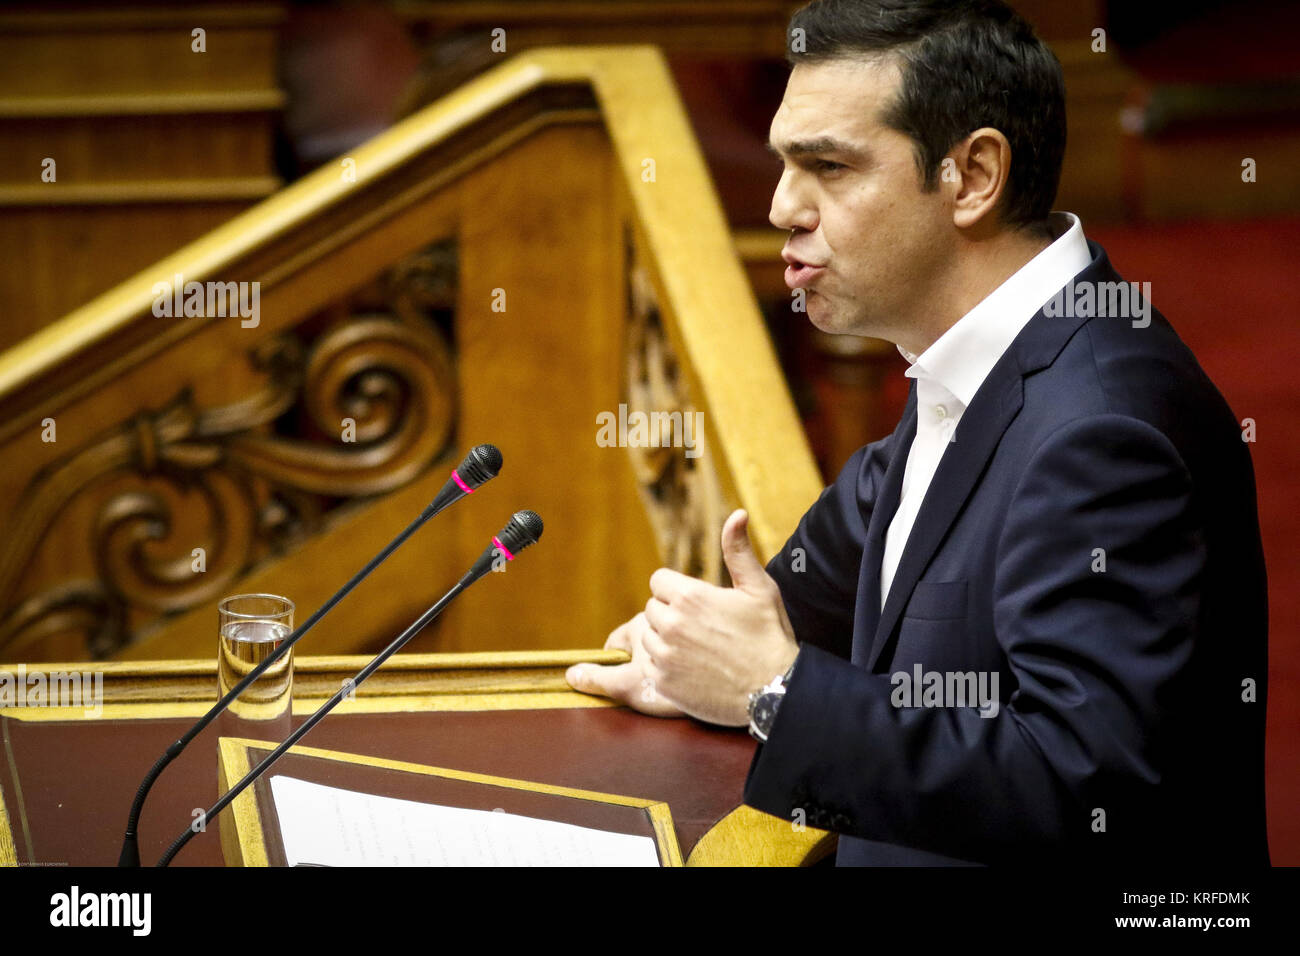 Athens, Greece. 19th Dec, 2017. Greek Prime Minister Alexis Tsipras addresses lawmakers during the parliament's session for the 2018 state budget in Athens, Greece, on Dec. 19, 2017. Greek lawmakers ratified on Tuesday evening the 2018 state budget. Credit: Marios Lolos/Xinhua/Alamy Live News Stock Photo